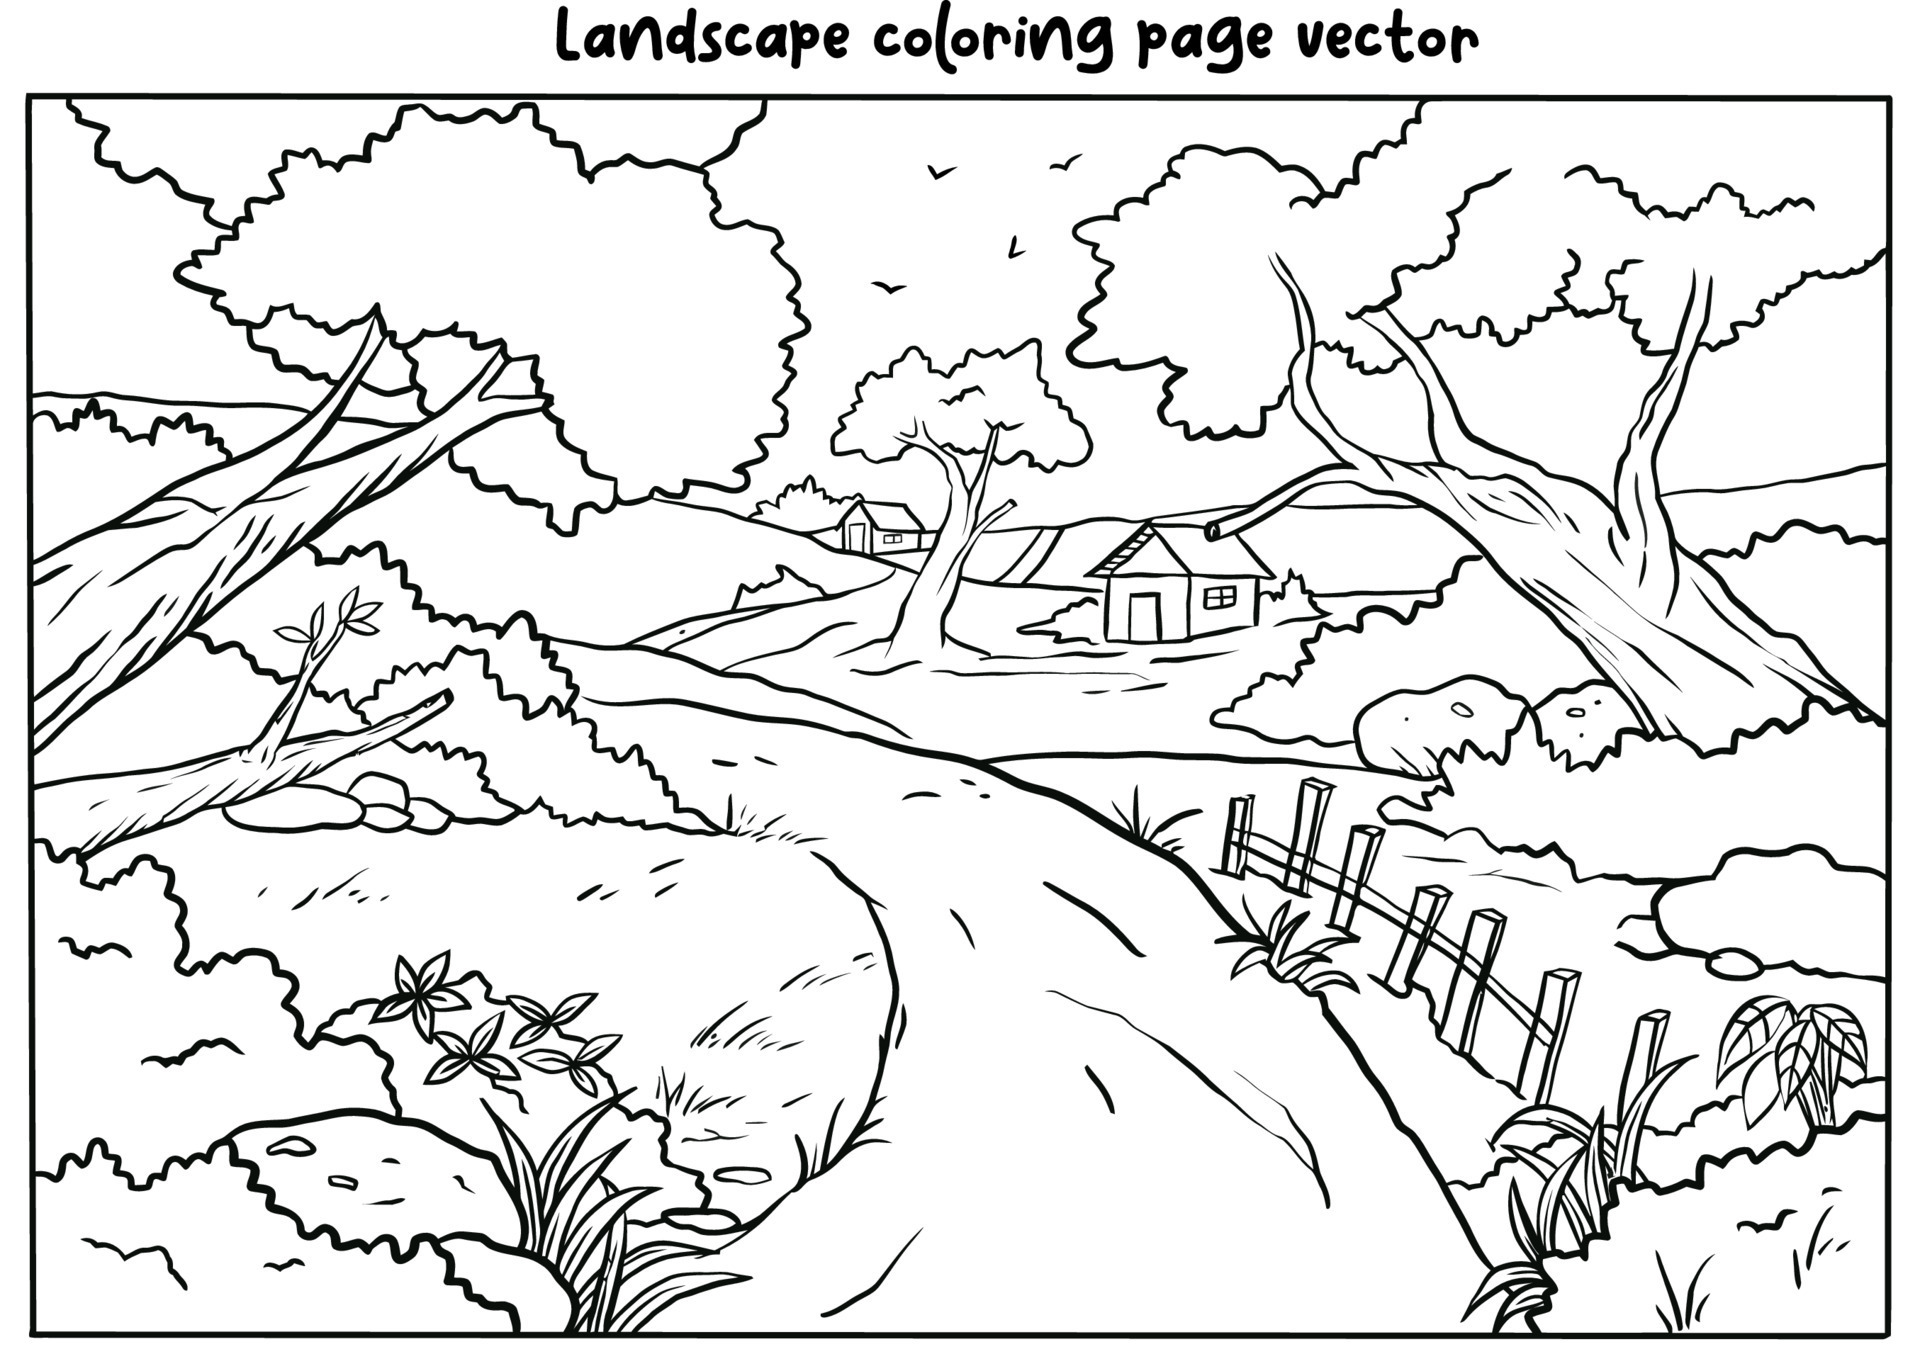 COUNTRYSIDE LANDSCAPE COLORING PAGE FOR ADULT 7695494 Vector Art at Vecteezy